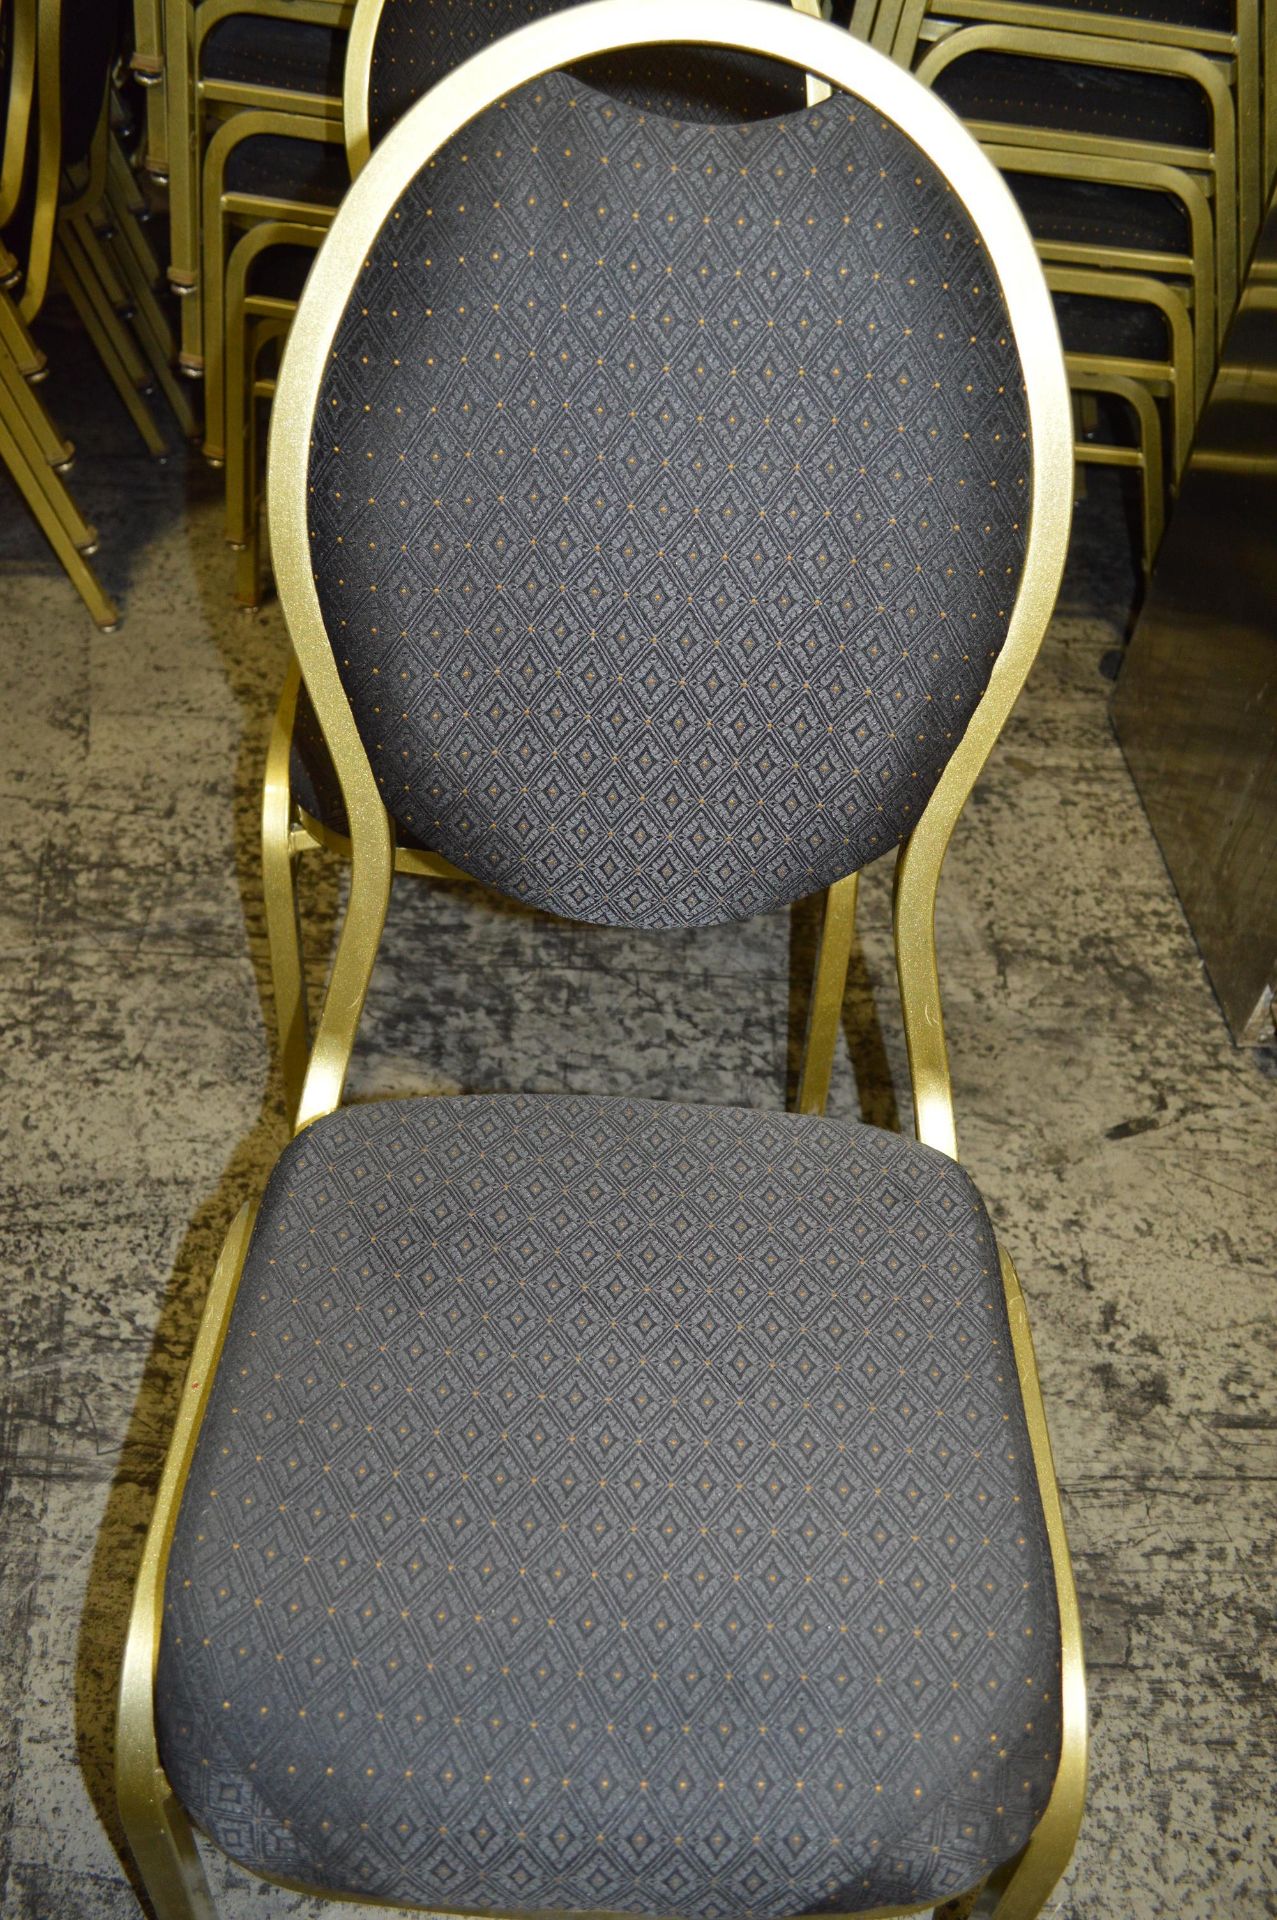 BANQUET METAL STACK CHAIRS-BLACK FABRIC-GOLD FRAME - Image 2 of 6